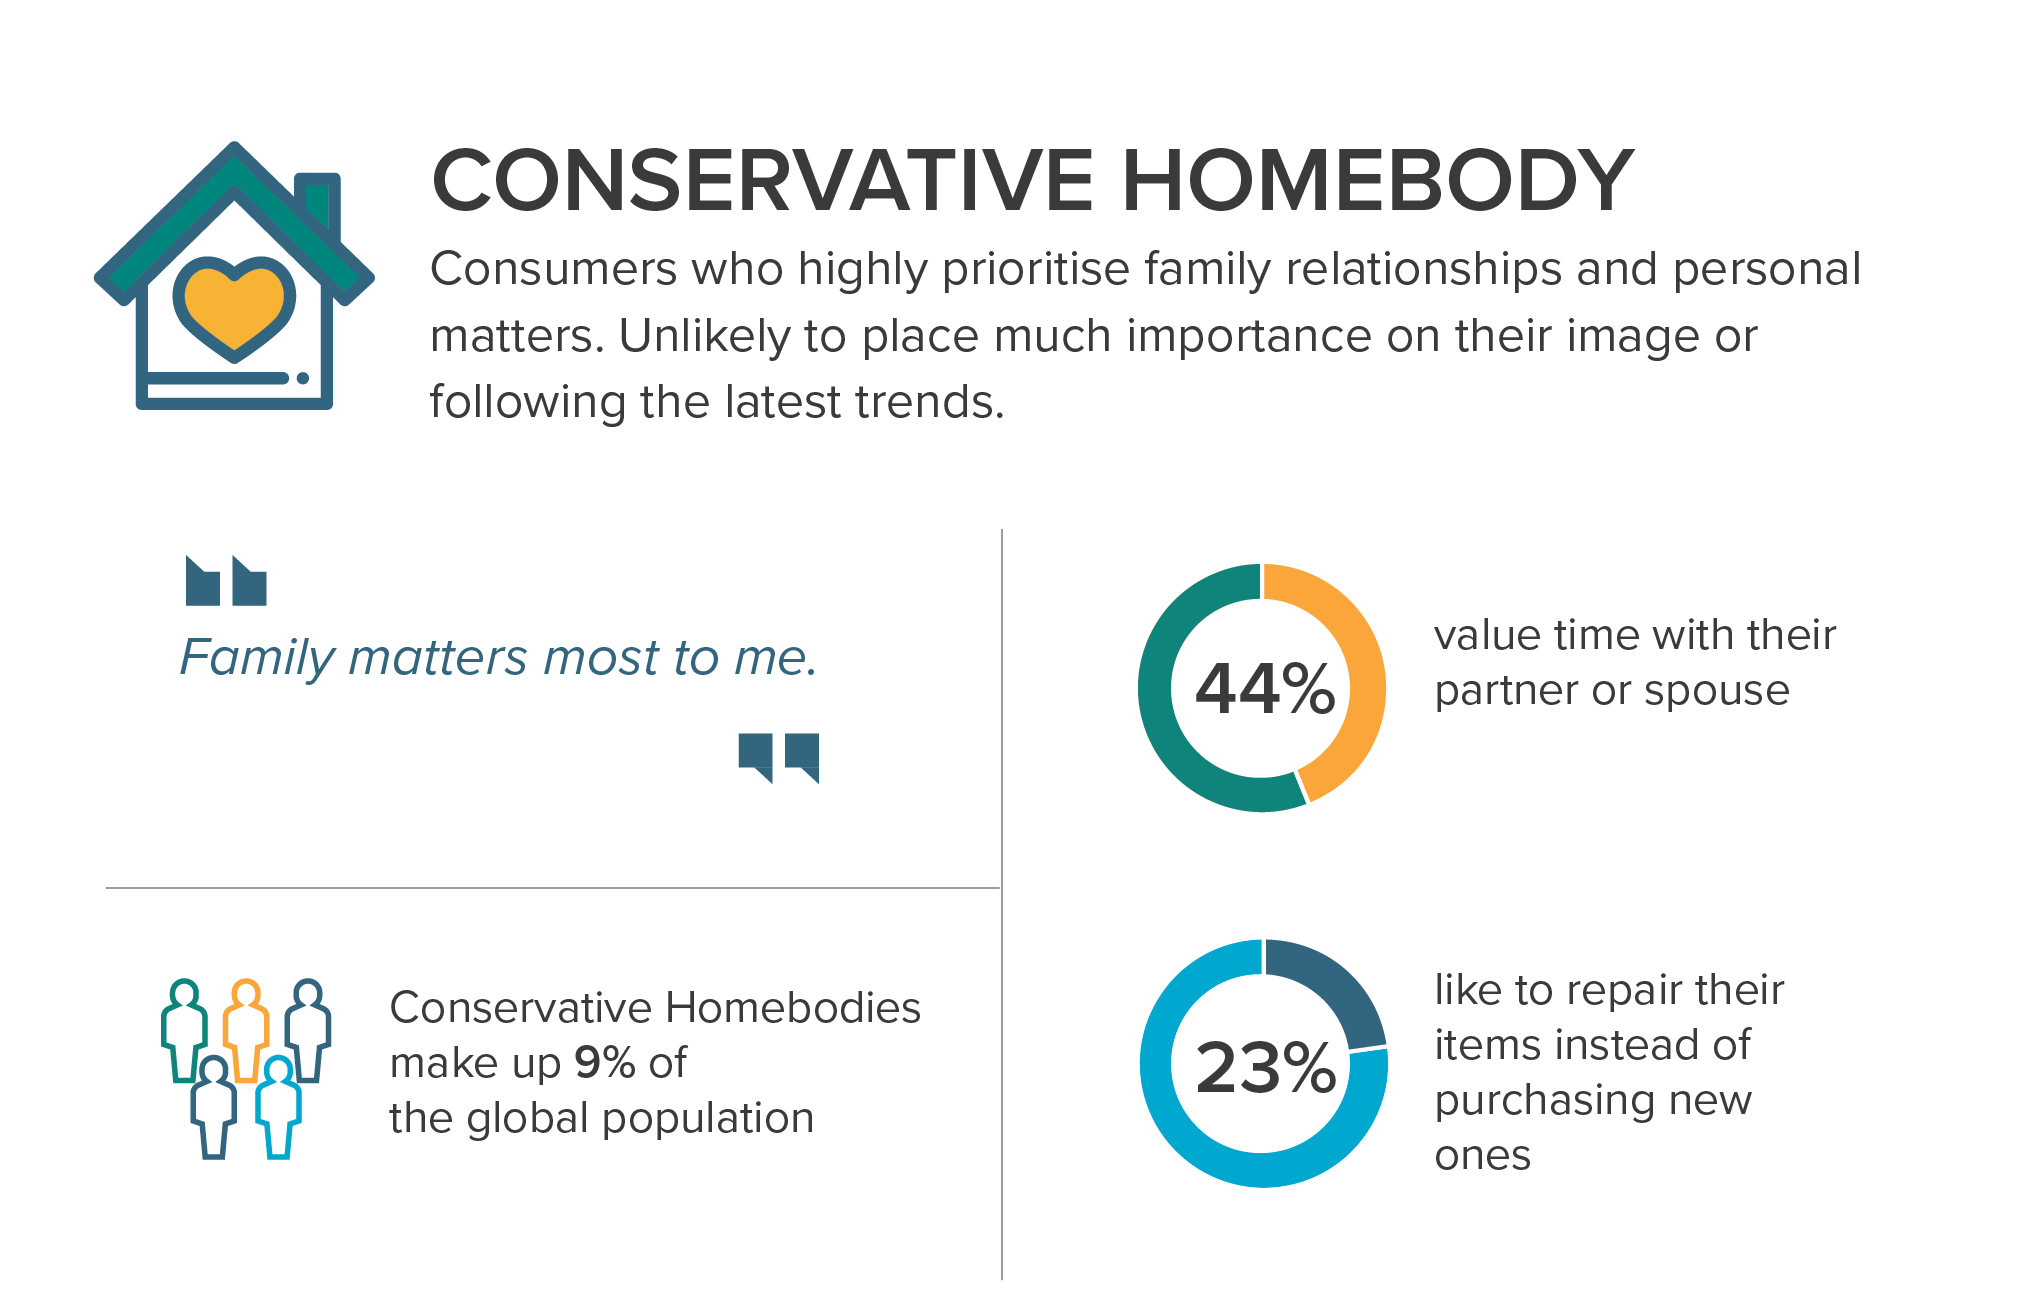 Who Is the Conservative Homebody?